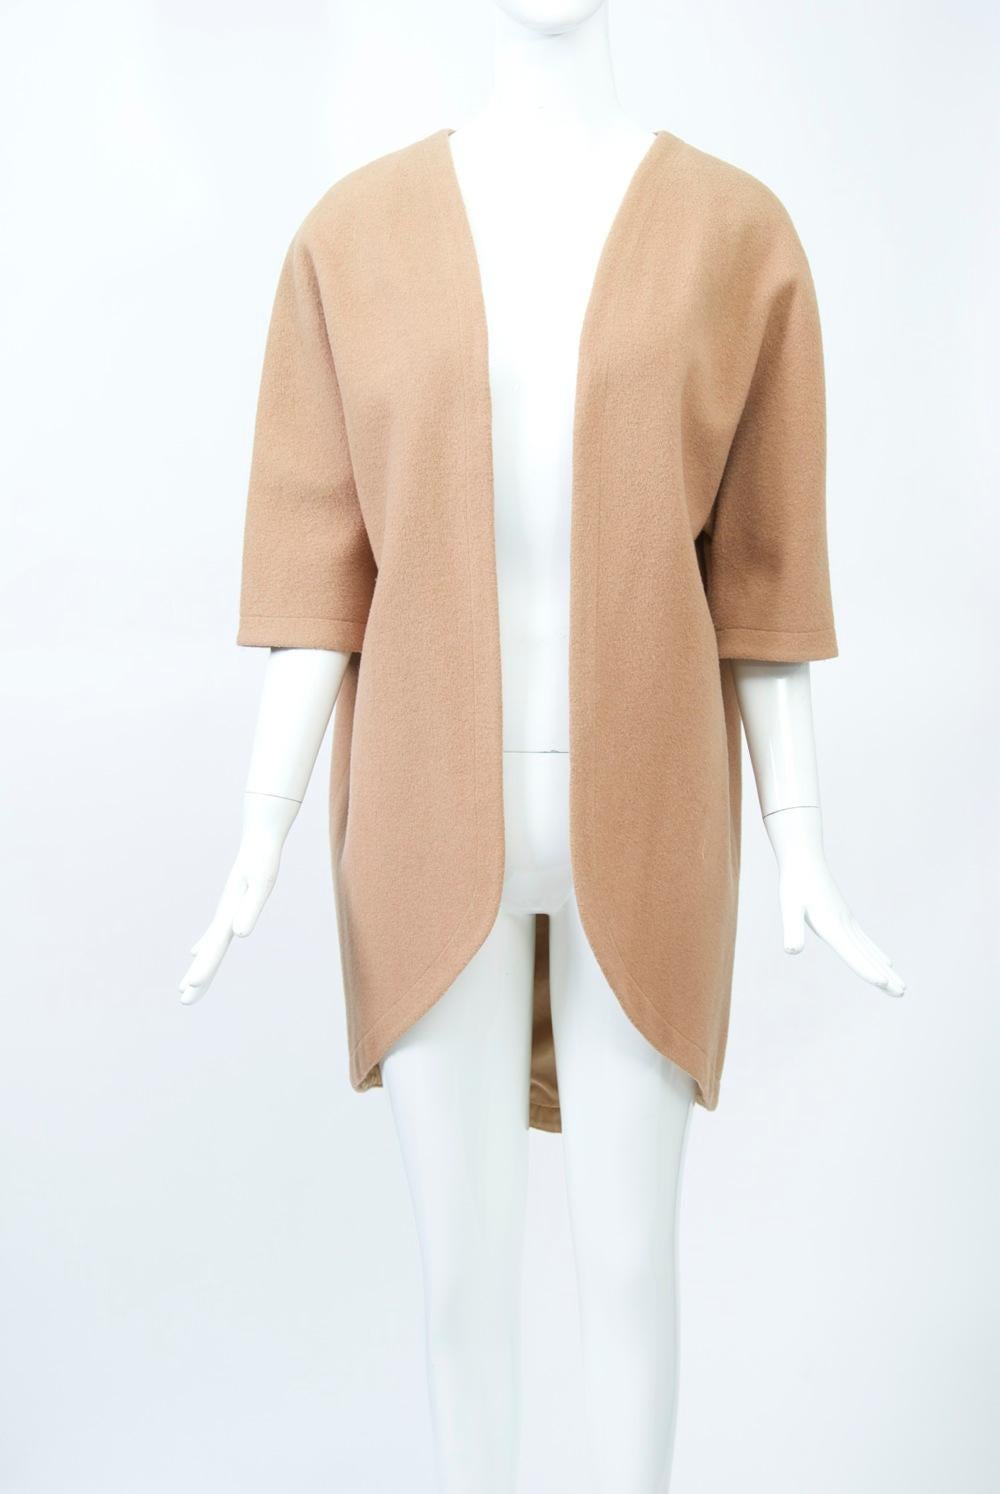 Camelhair blend cutaway jacket/coat with elbow-length dolman sleeves, collarless, and open front. Tan lining to match. The fabric was called Camapile, a blend of 85% wool and 15% camelhair. Minimalist and versatile mid-century piece to wear with a